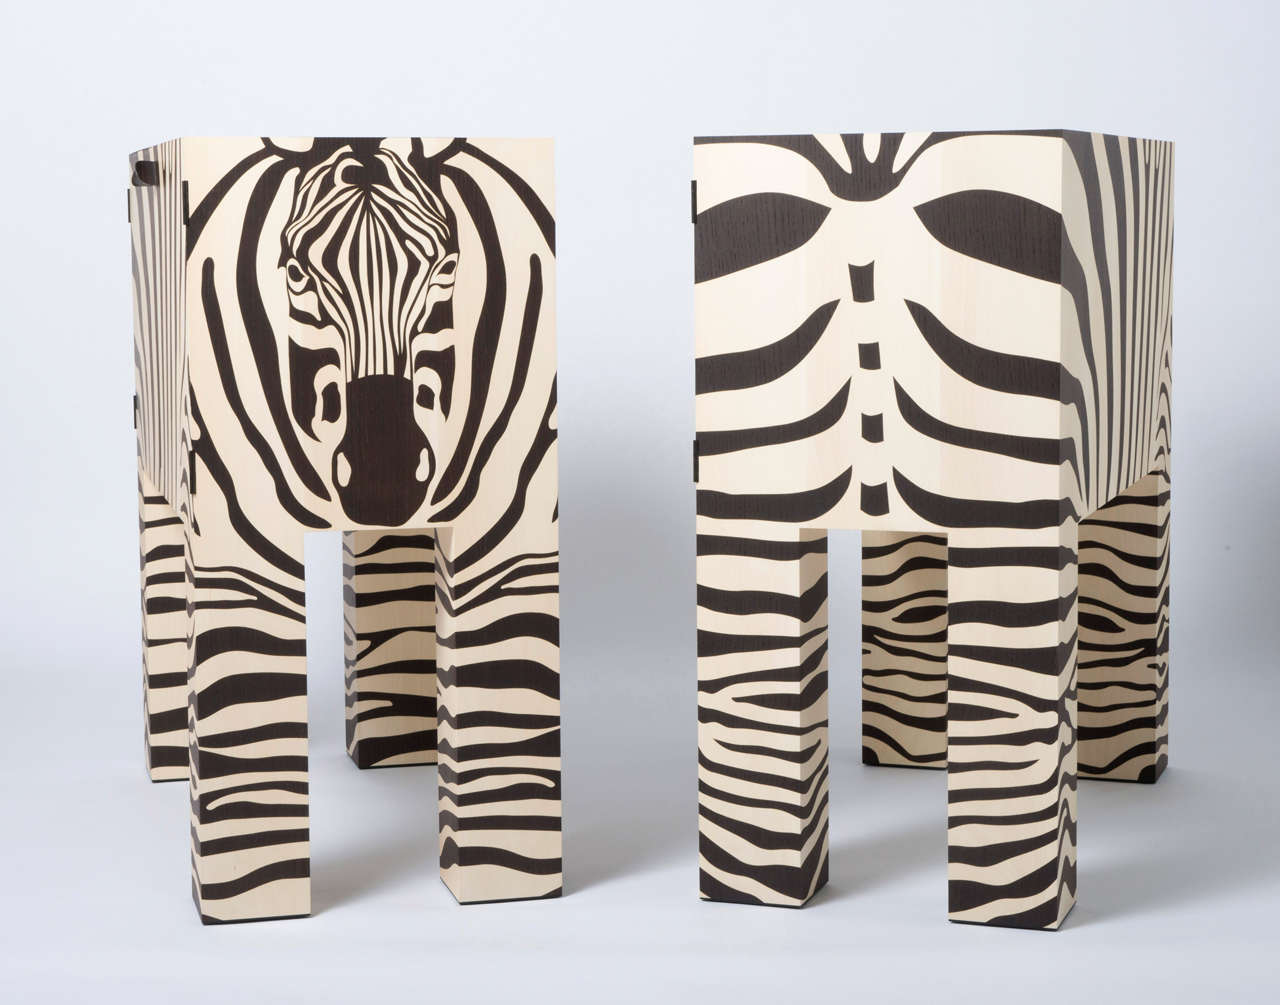 Wood John Makepeace pair of marquetry “Zebra” cabinets, England 2010